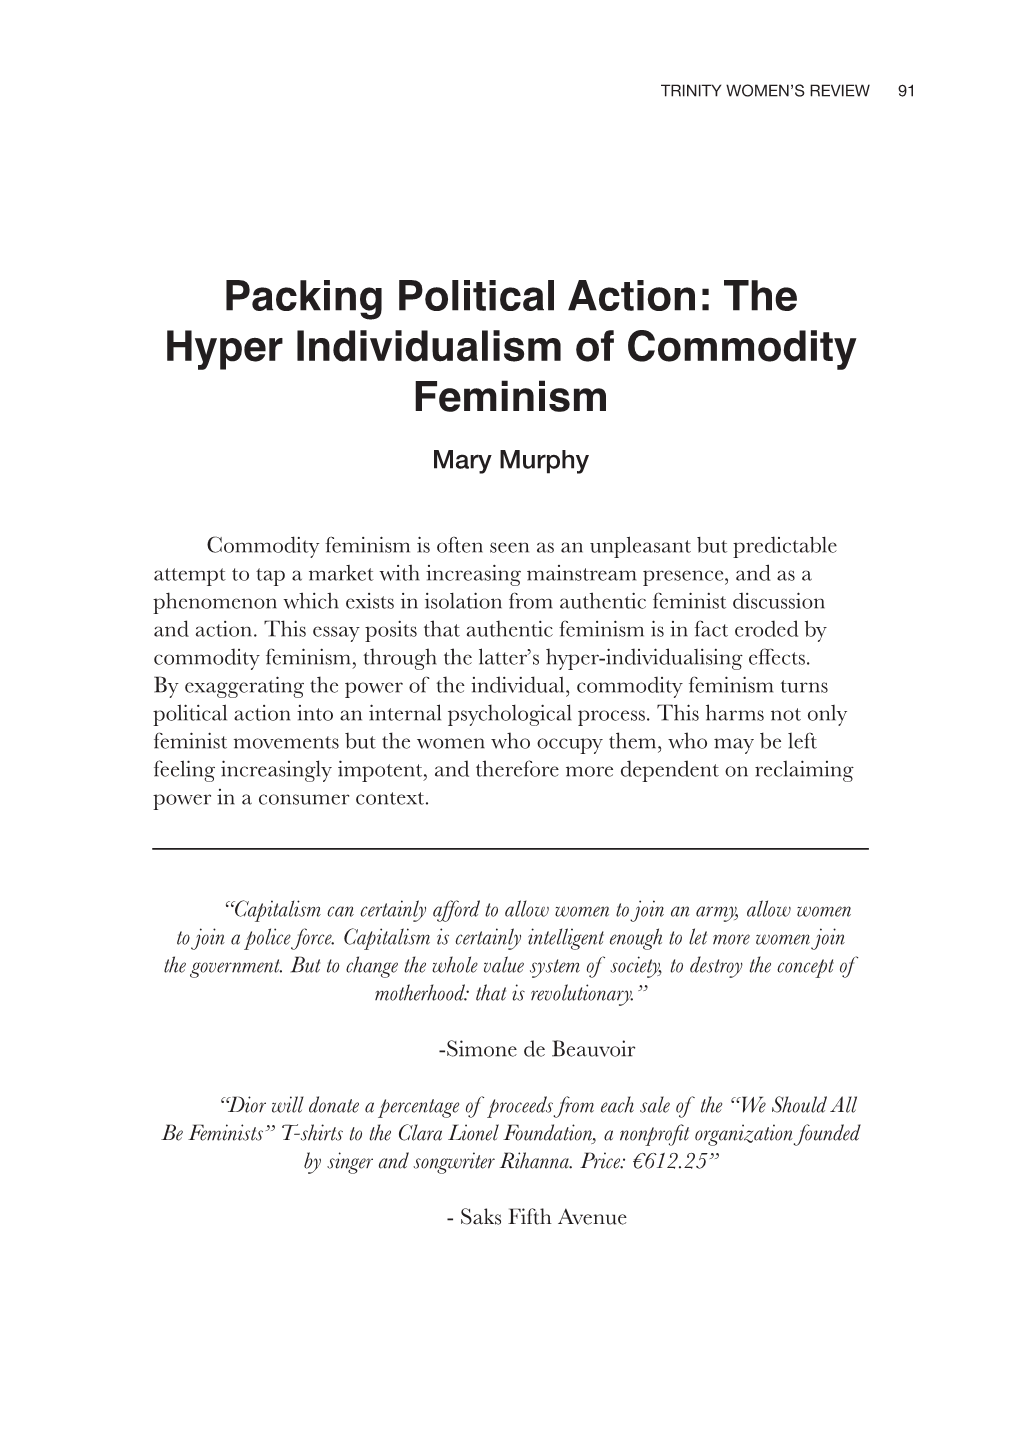 The Hyper Individualism of Commodity Feminism